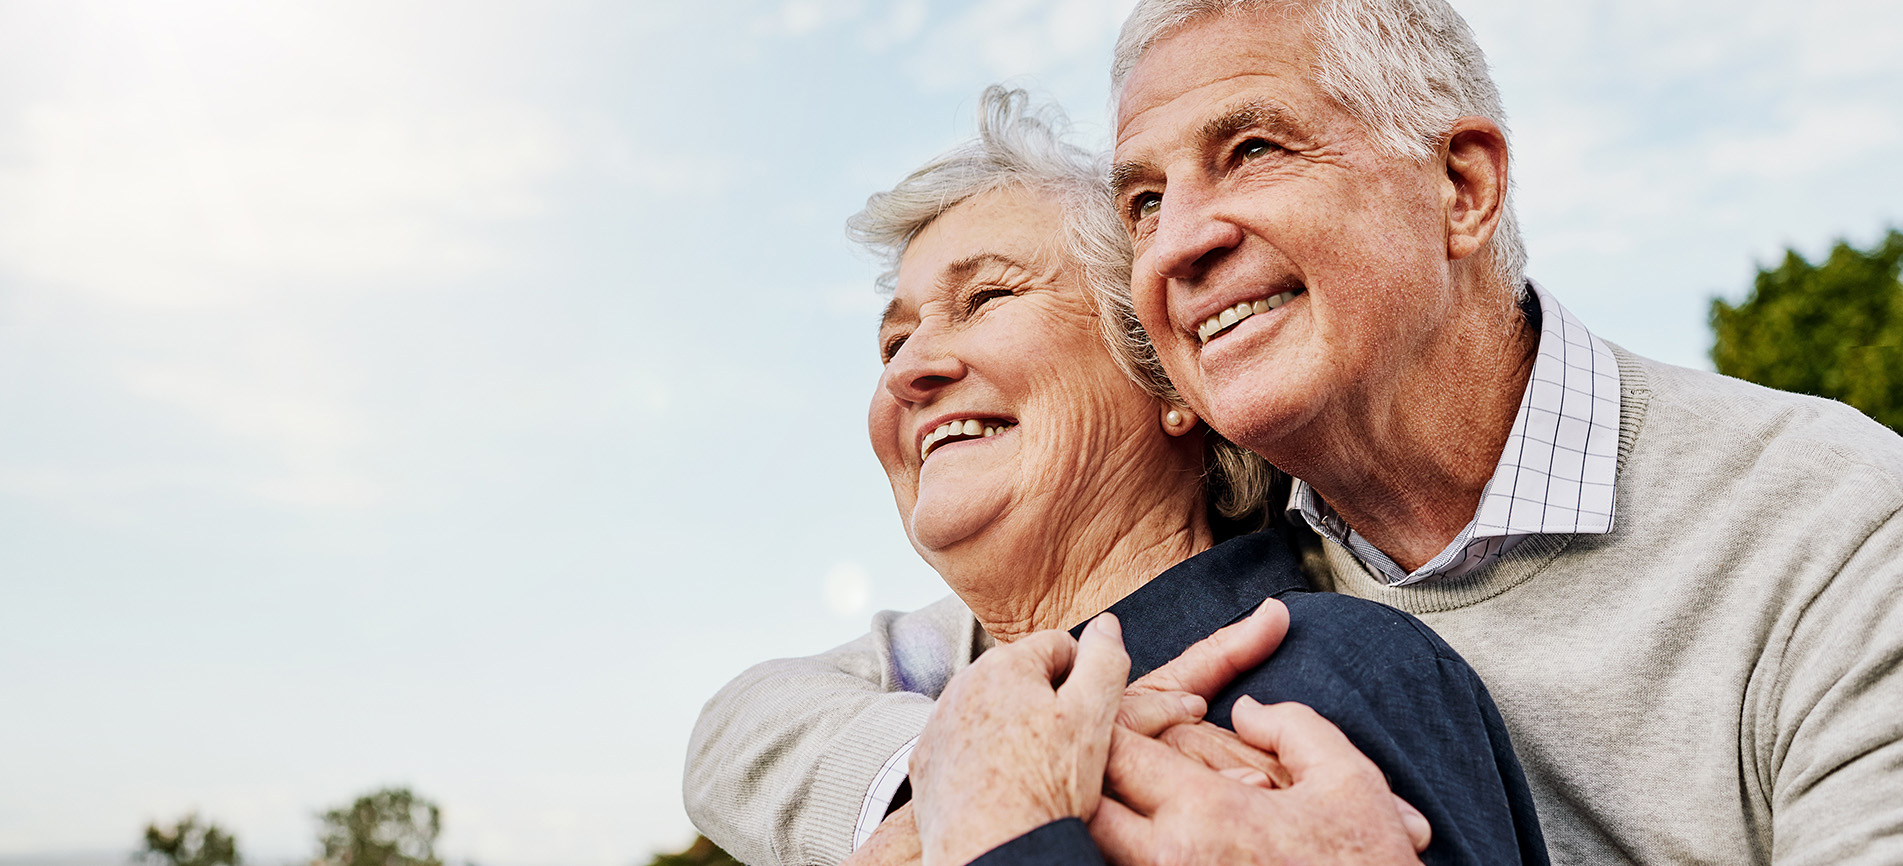 A happy older couple are shown in an embrace against a partly cloudy blue sky.